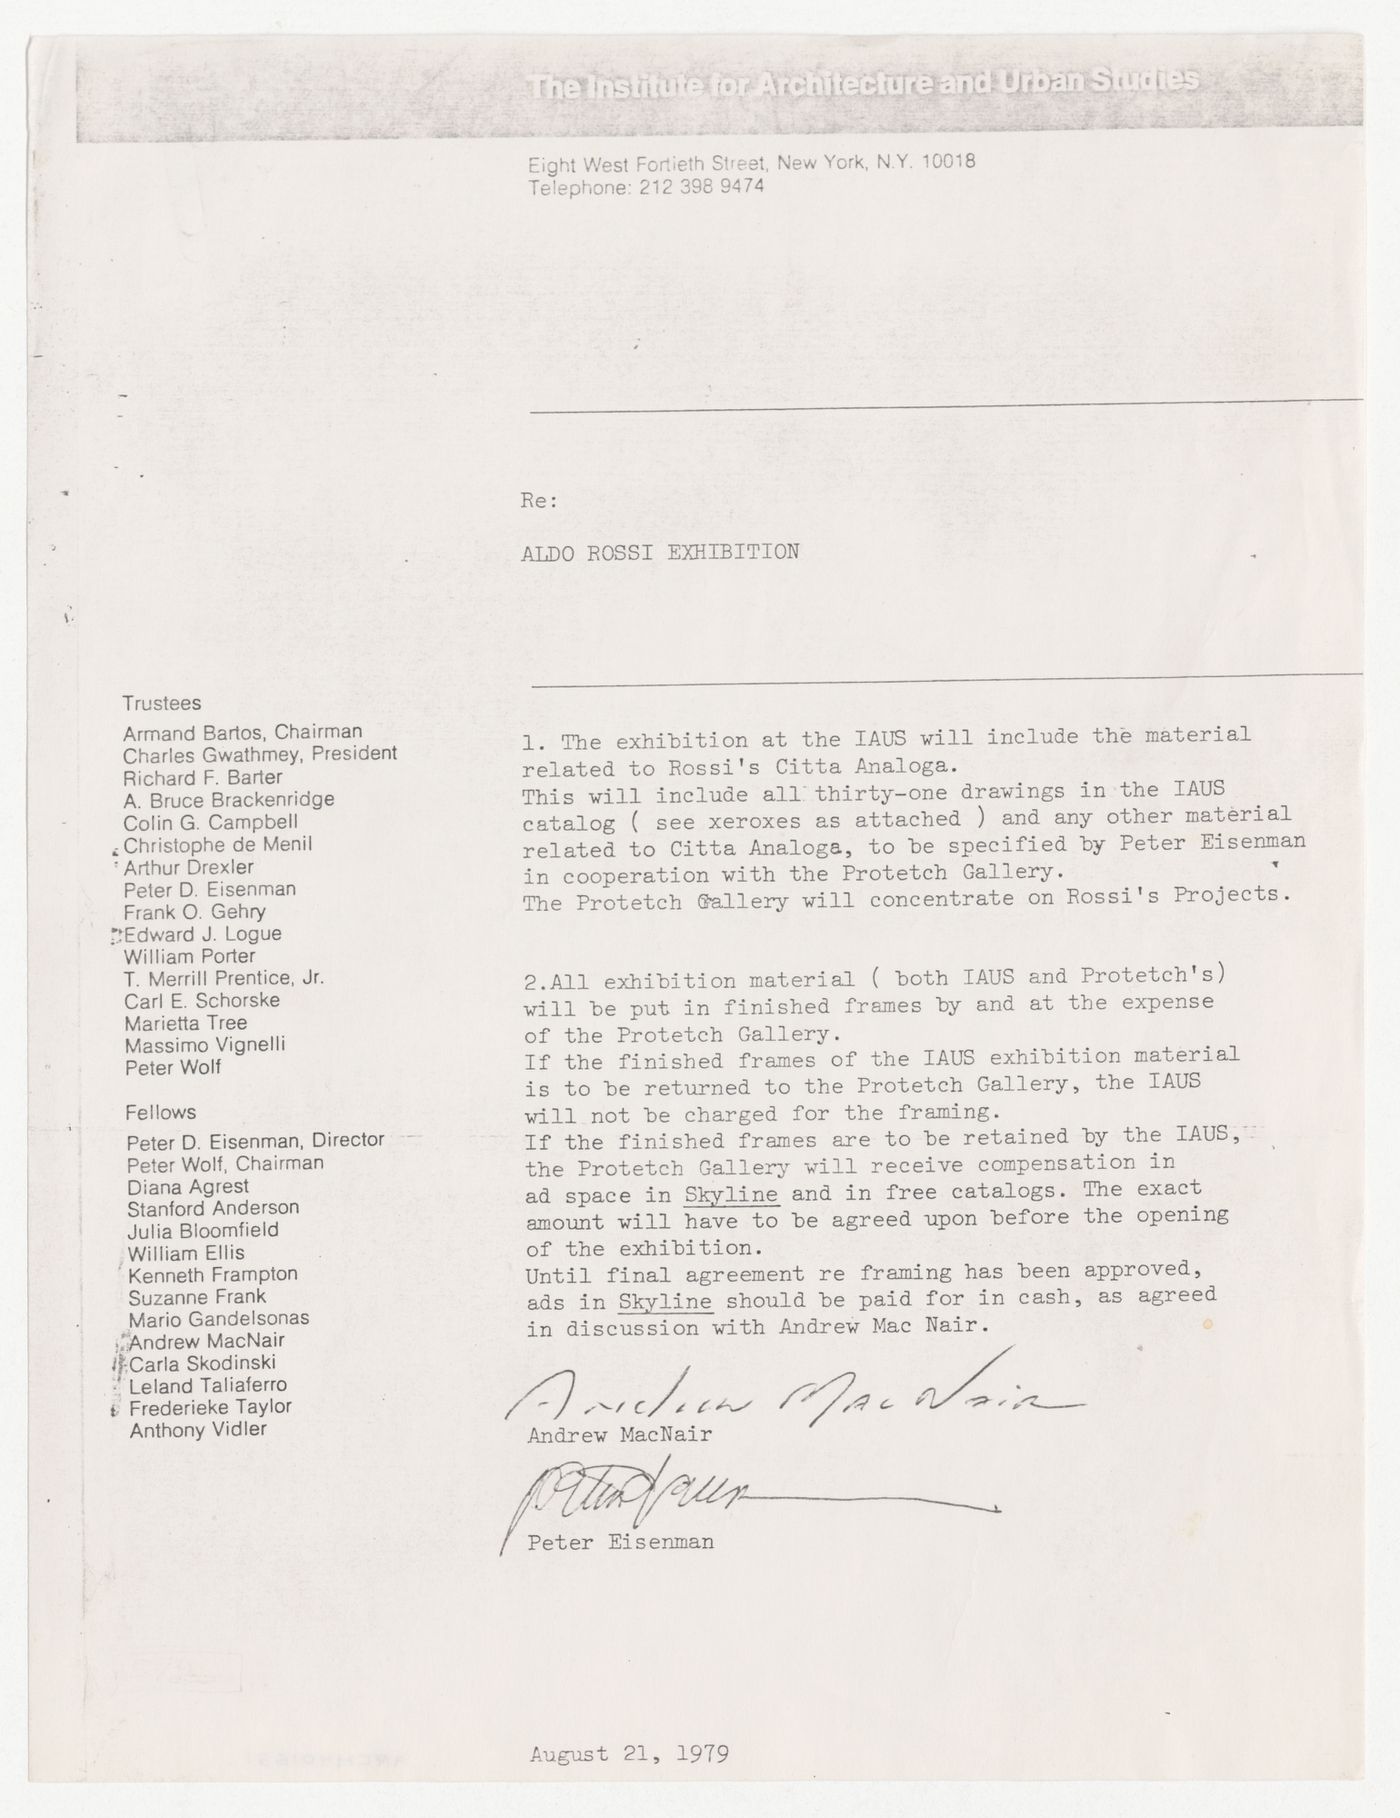 Letter from Peter D. Eisenman and Andrew MacNair about Aldo Rossi exhibition